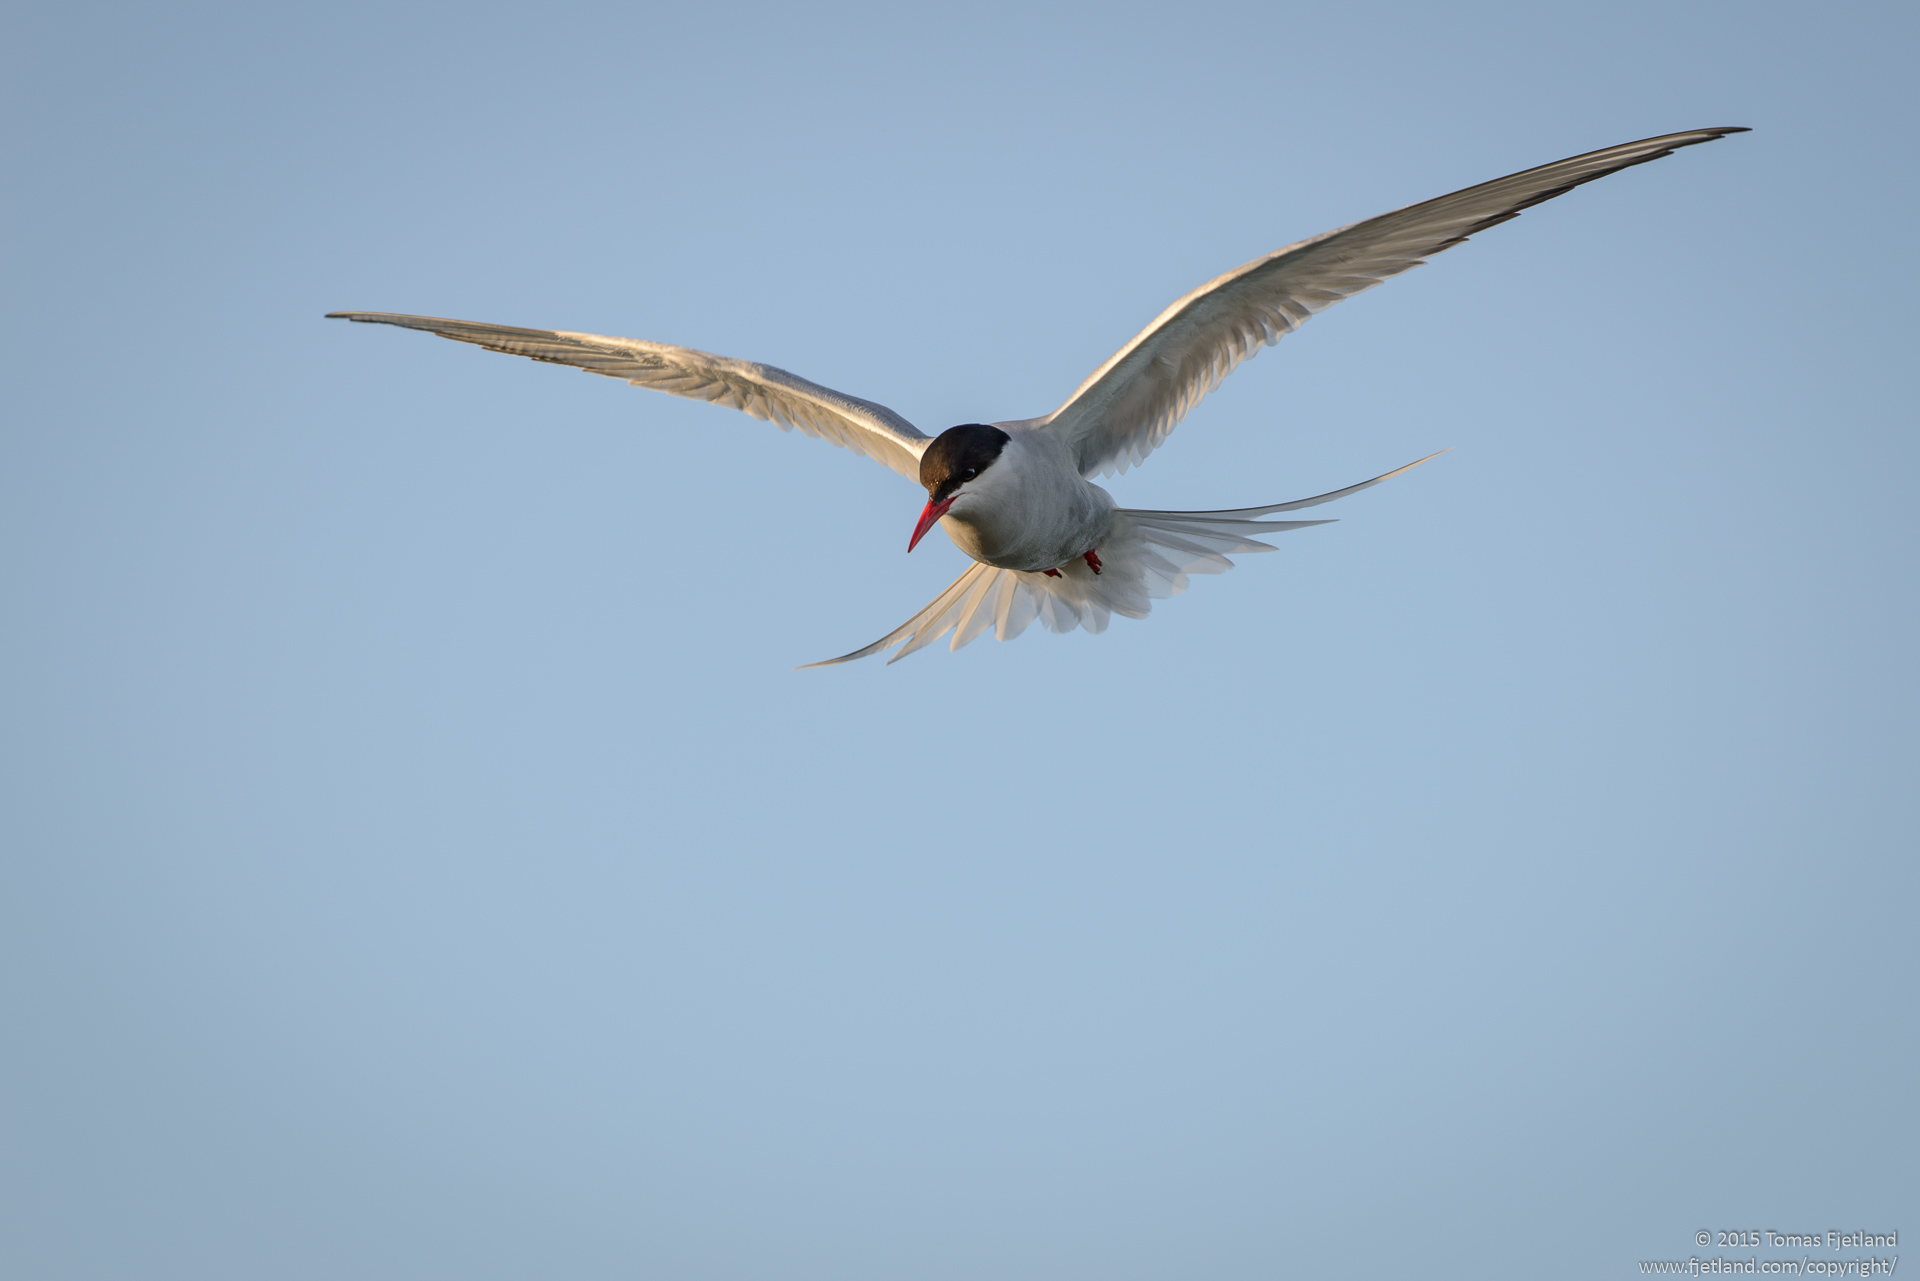 Arctic tern scouting for shrimps, mollusks and anything else the walruses whirl up